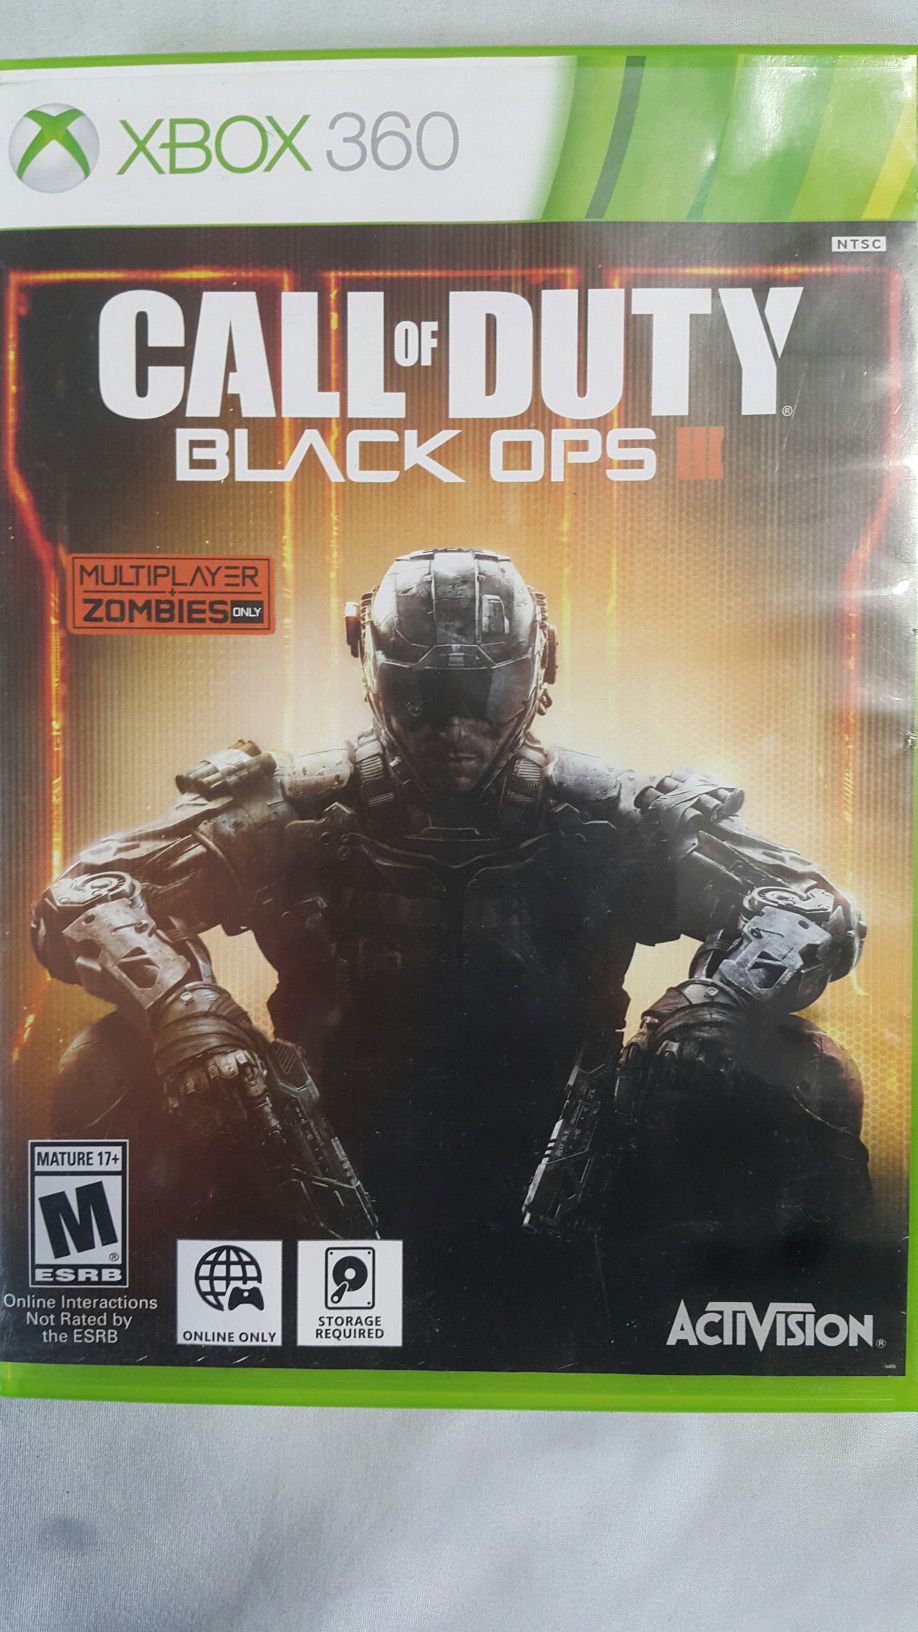 CALL OF DUTY BLACK OPS 3 FOR XBOX 360